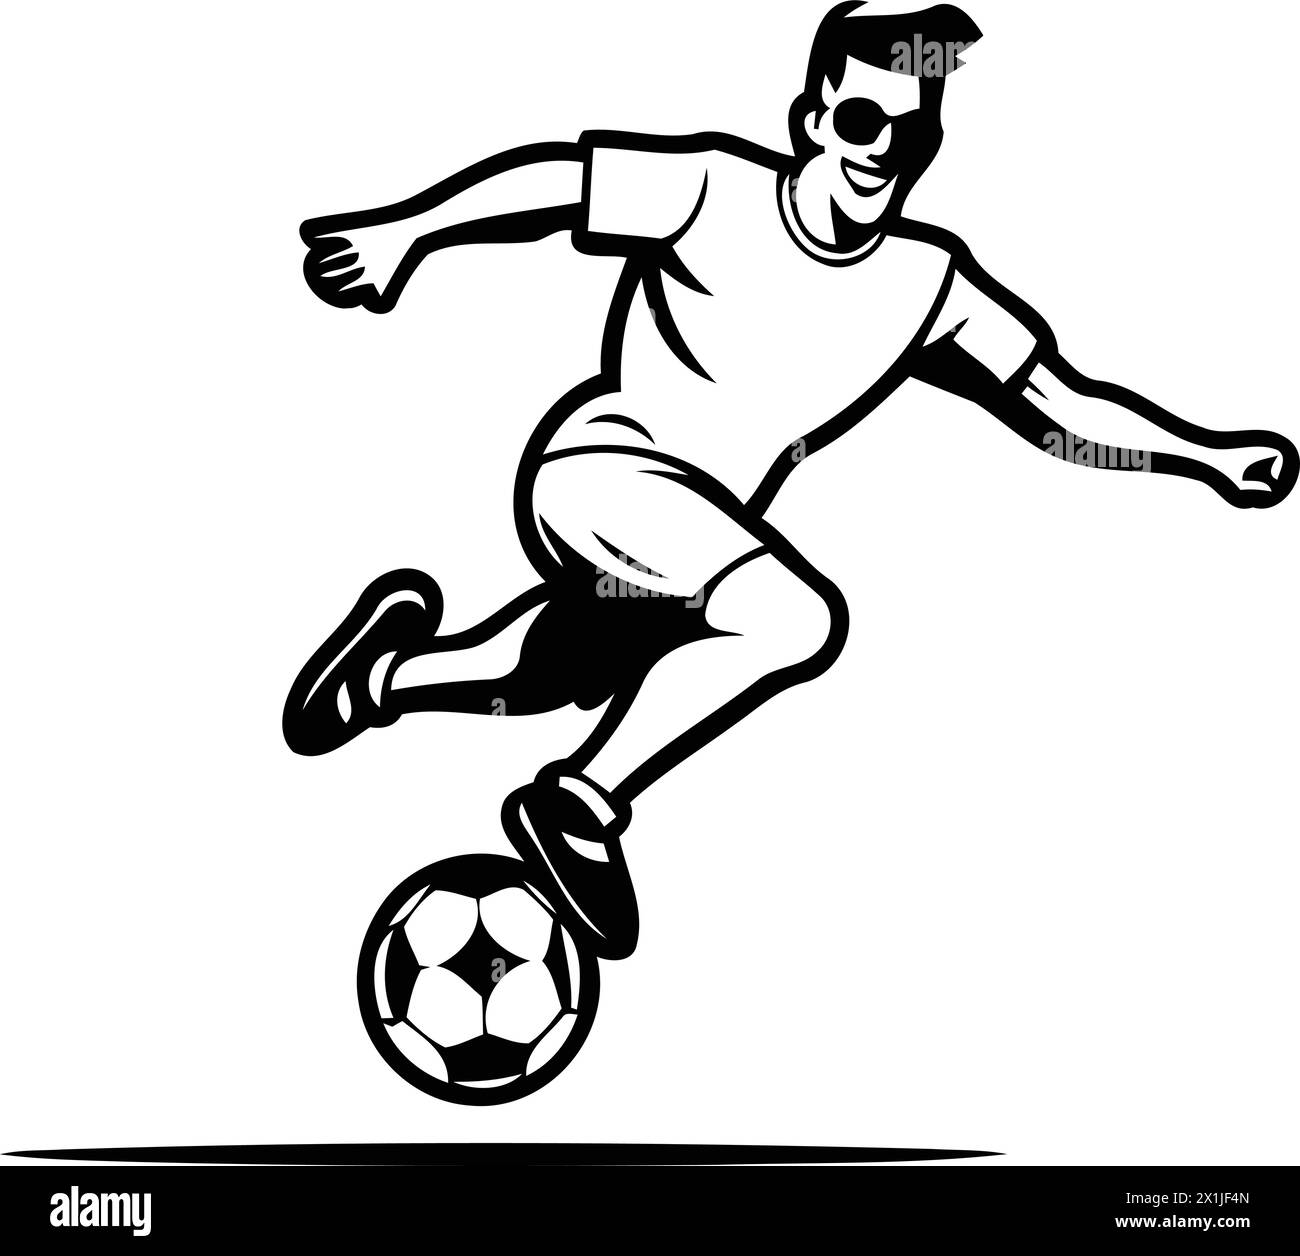 Soccer player kicking the ball in the beach. Vector illustration. Stock Vector